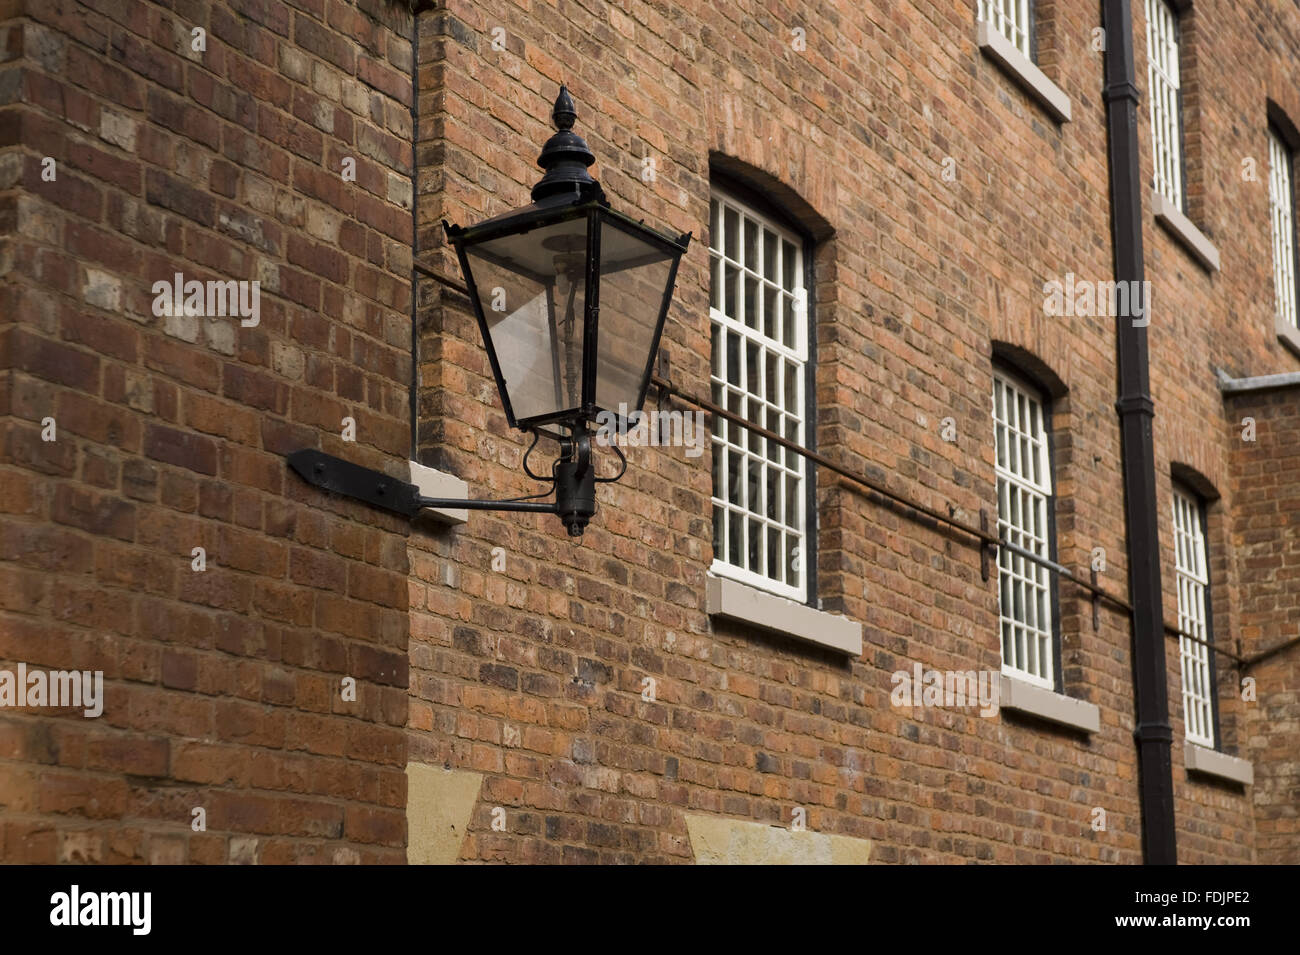 A lamp on the wall at Quarry Bank Mill, Styal, Cheshire. The mill was founded in 1784 and produced cotton until the 1950s. Stock Photo